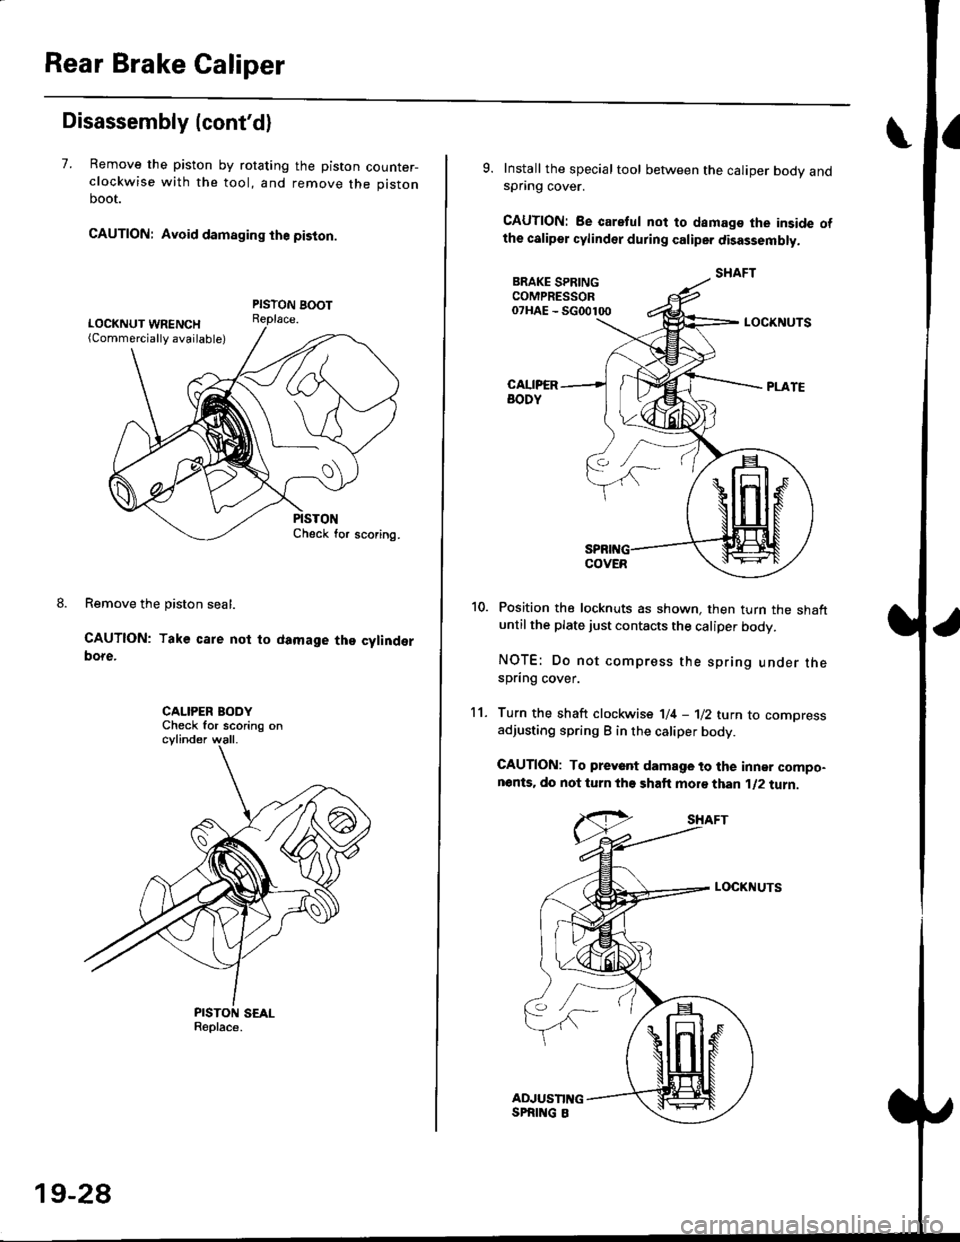 HONDA CIVIC 1996 6.G Owners Guide Rear Brake Galiper
Disassembly (contd)
7. Remove the piston by rotating the piston counter-clockwise with the tool, and remove the piston
boot.
CAUTION: Avoid damaging the piston.
PISTON BOOTReplace.